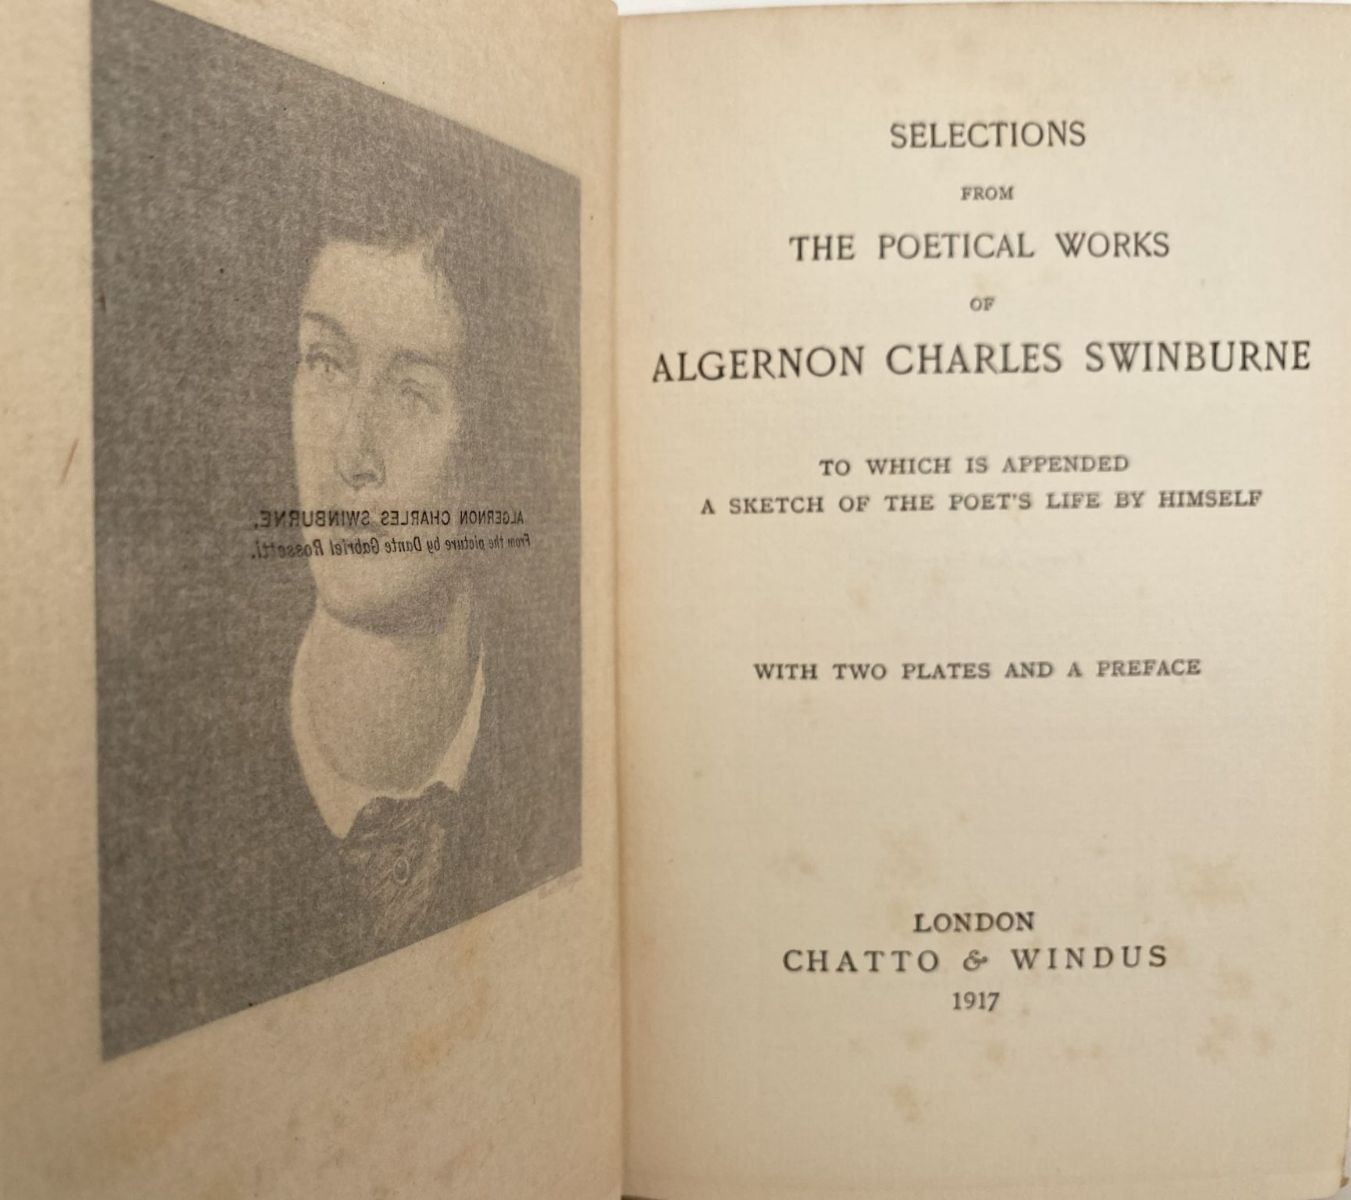 SELECTIONS FROM SWINBURNE'S POEMS